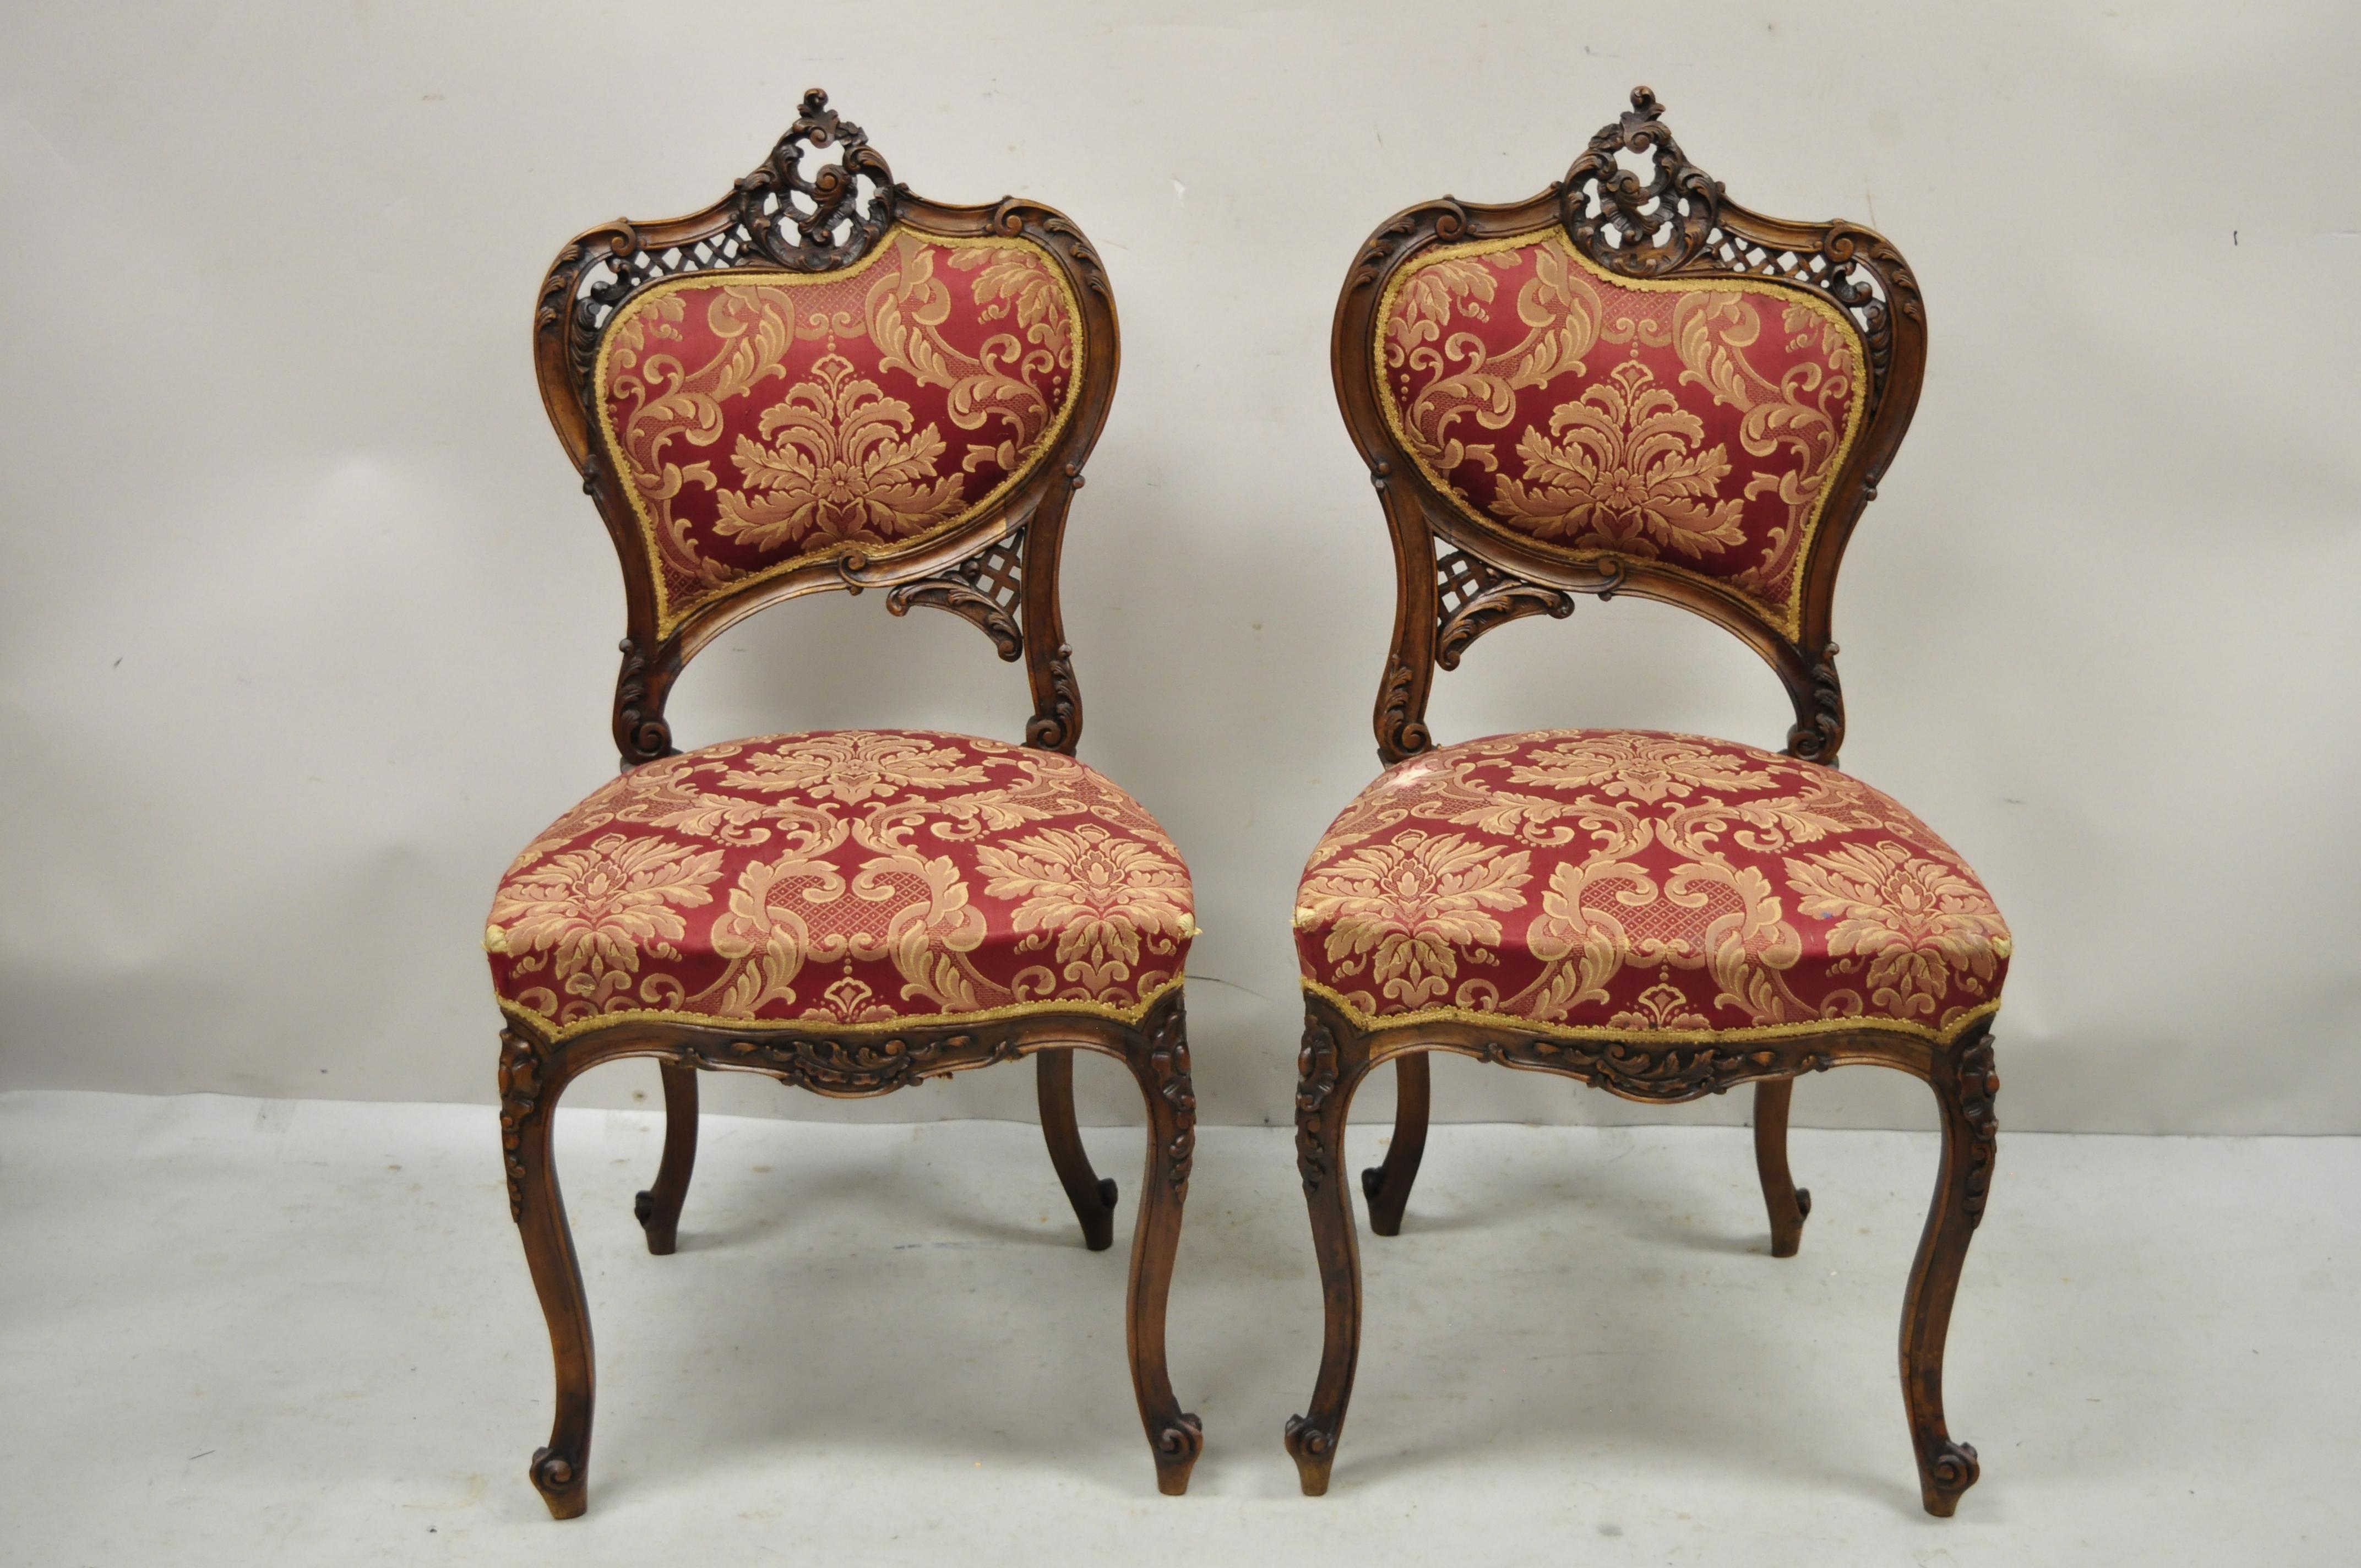 Antique Victorian French carved mahogany parlor accent side chairs - a Pair. Item features solid wood frames, nicely carved details, cabriole legs, very nice antique pair, quality craftsmanship, great style and form. Circa Early 1900s. Measurements: